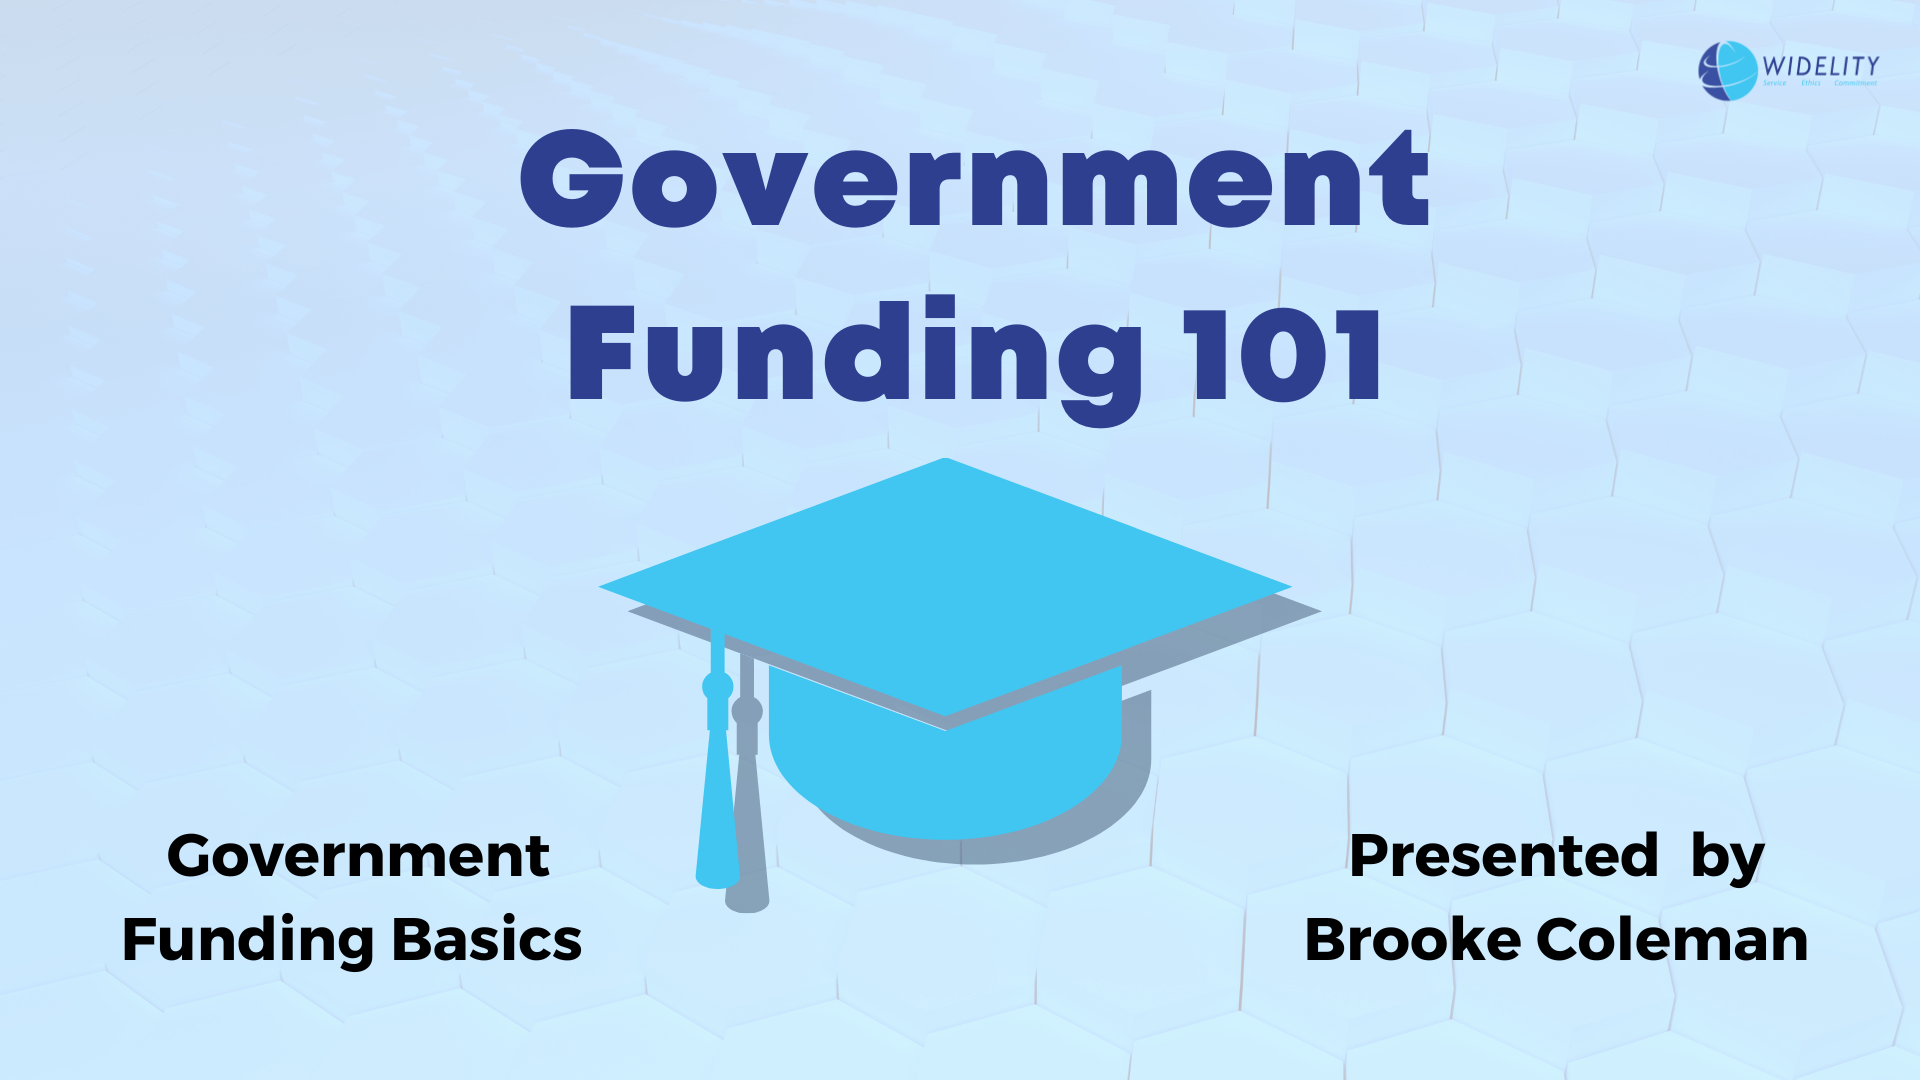 Cover image for the upcoming Widelity webinar, Government Funding 101